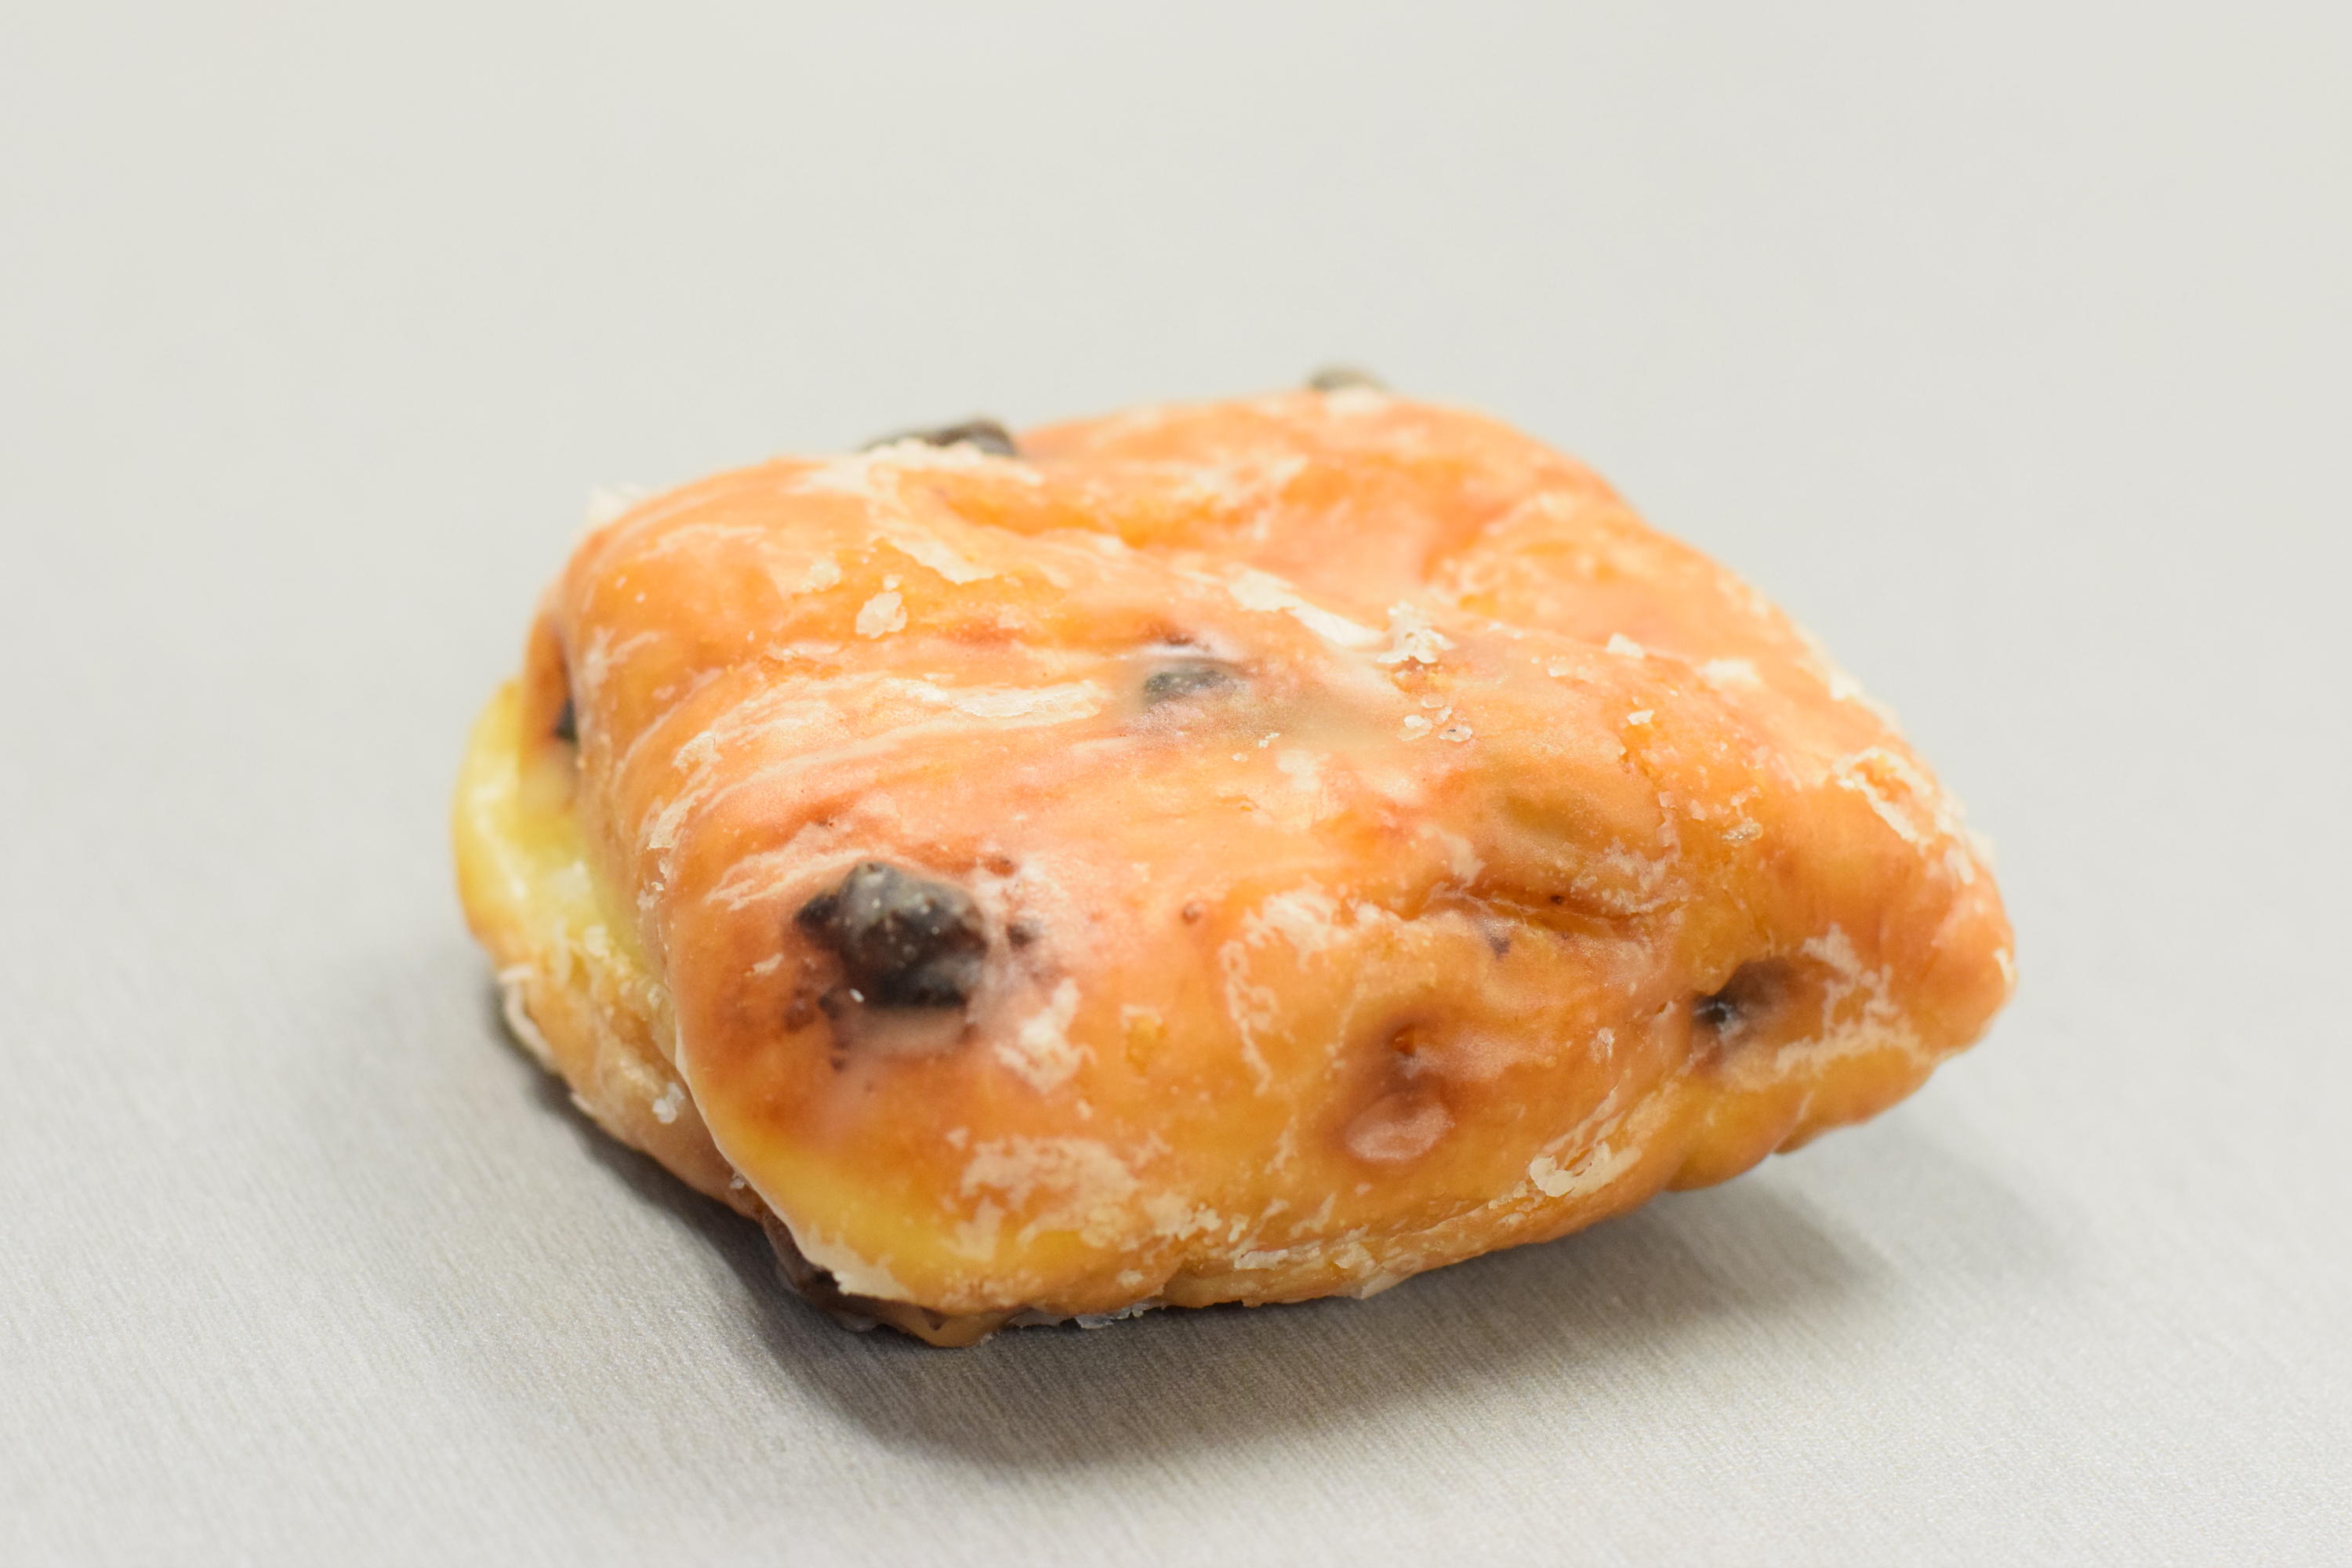 Photo of donut fritter